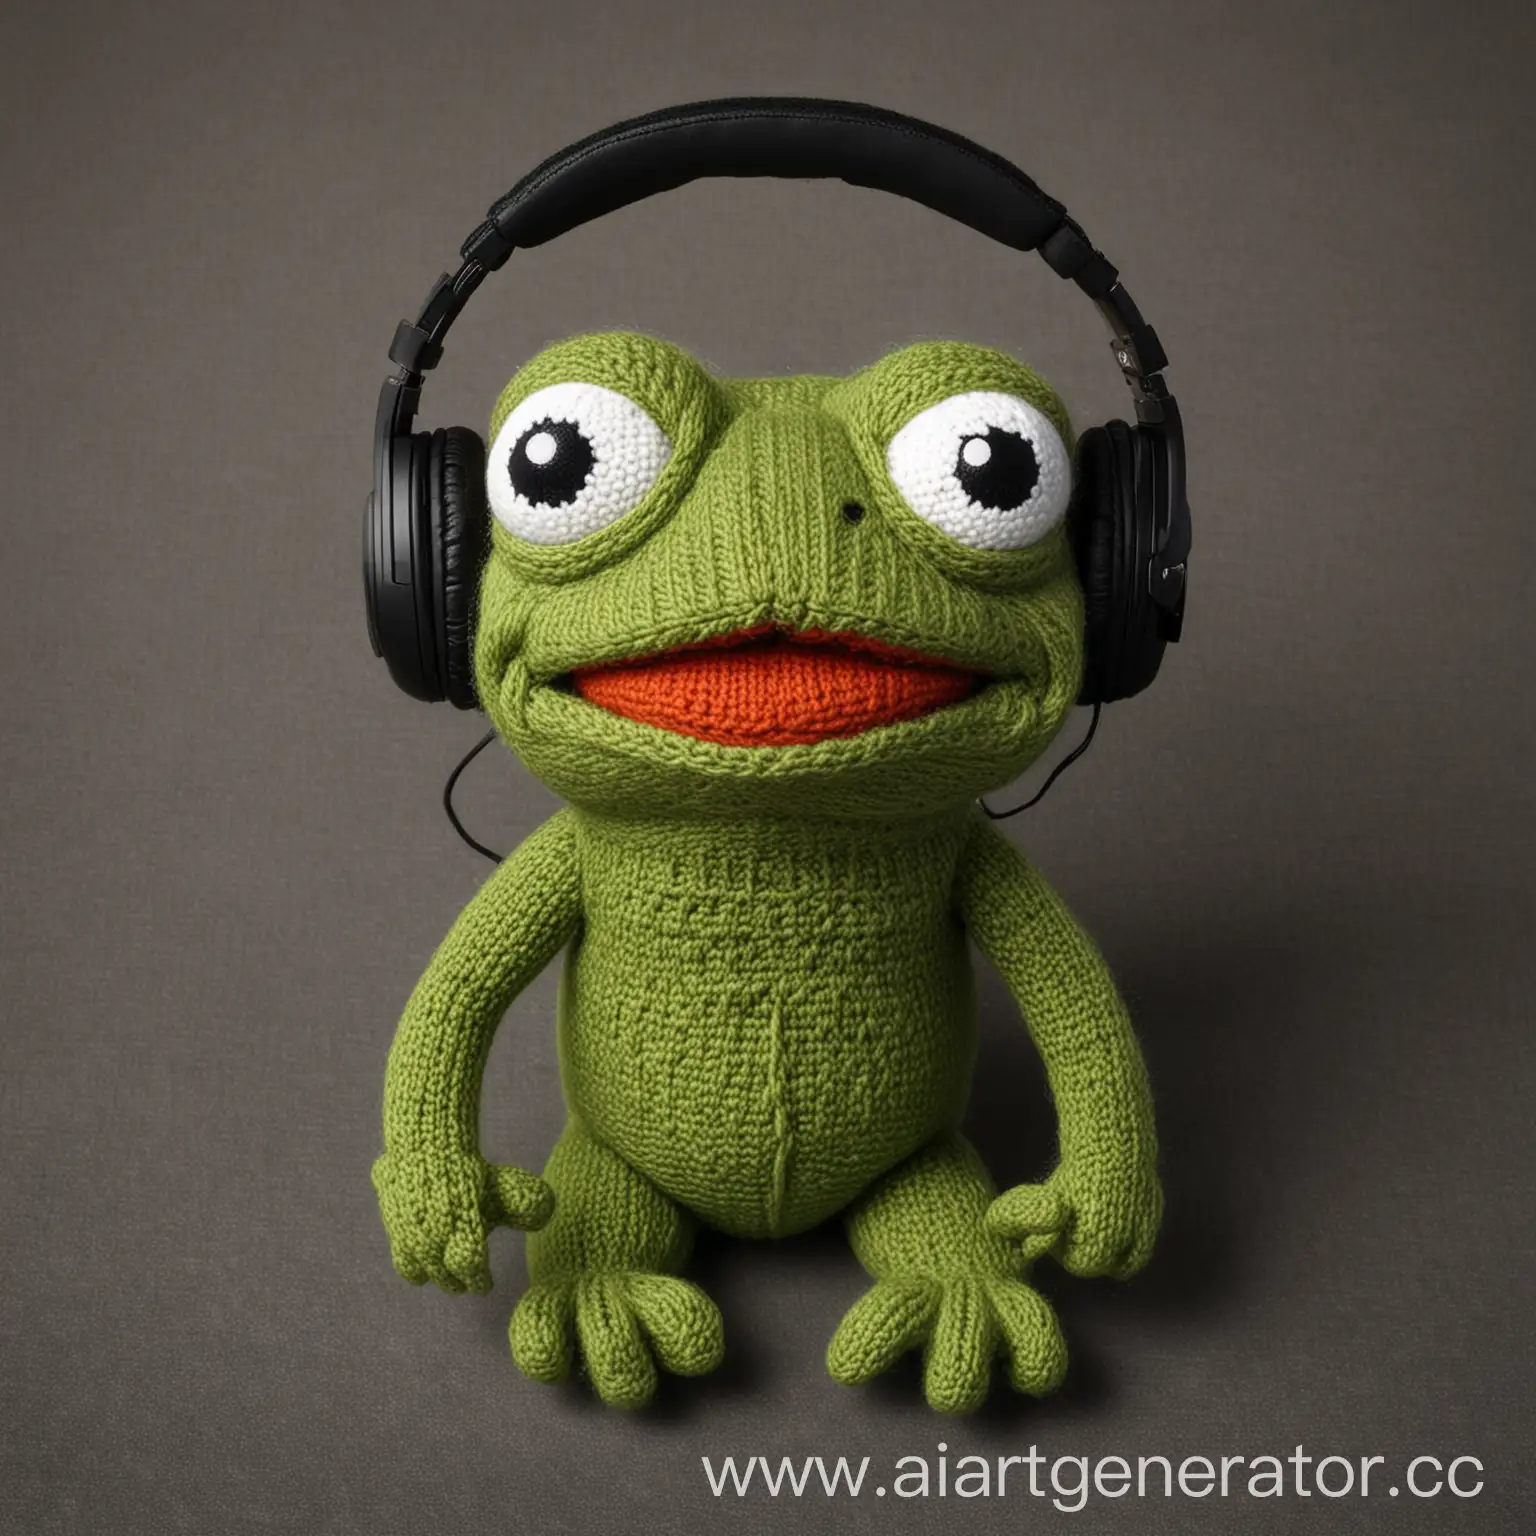 Cute-Knitted-Pepe-Frog-Wearing-Headphones-and-Playing-with-Gamepad